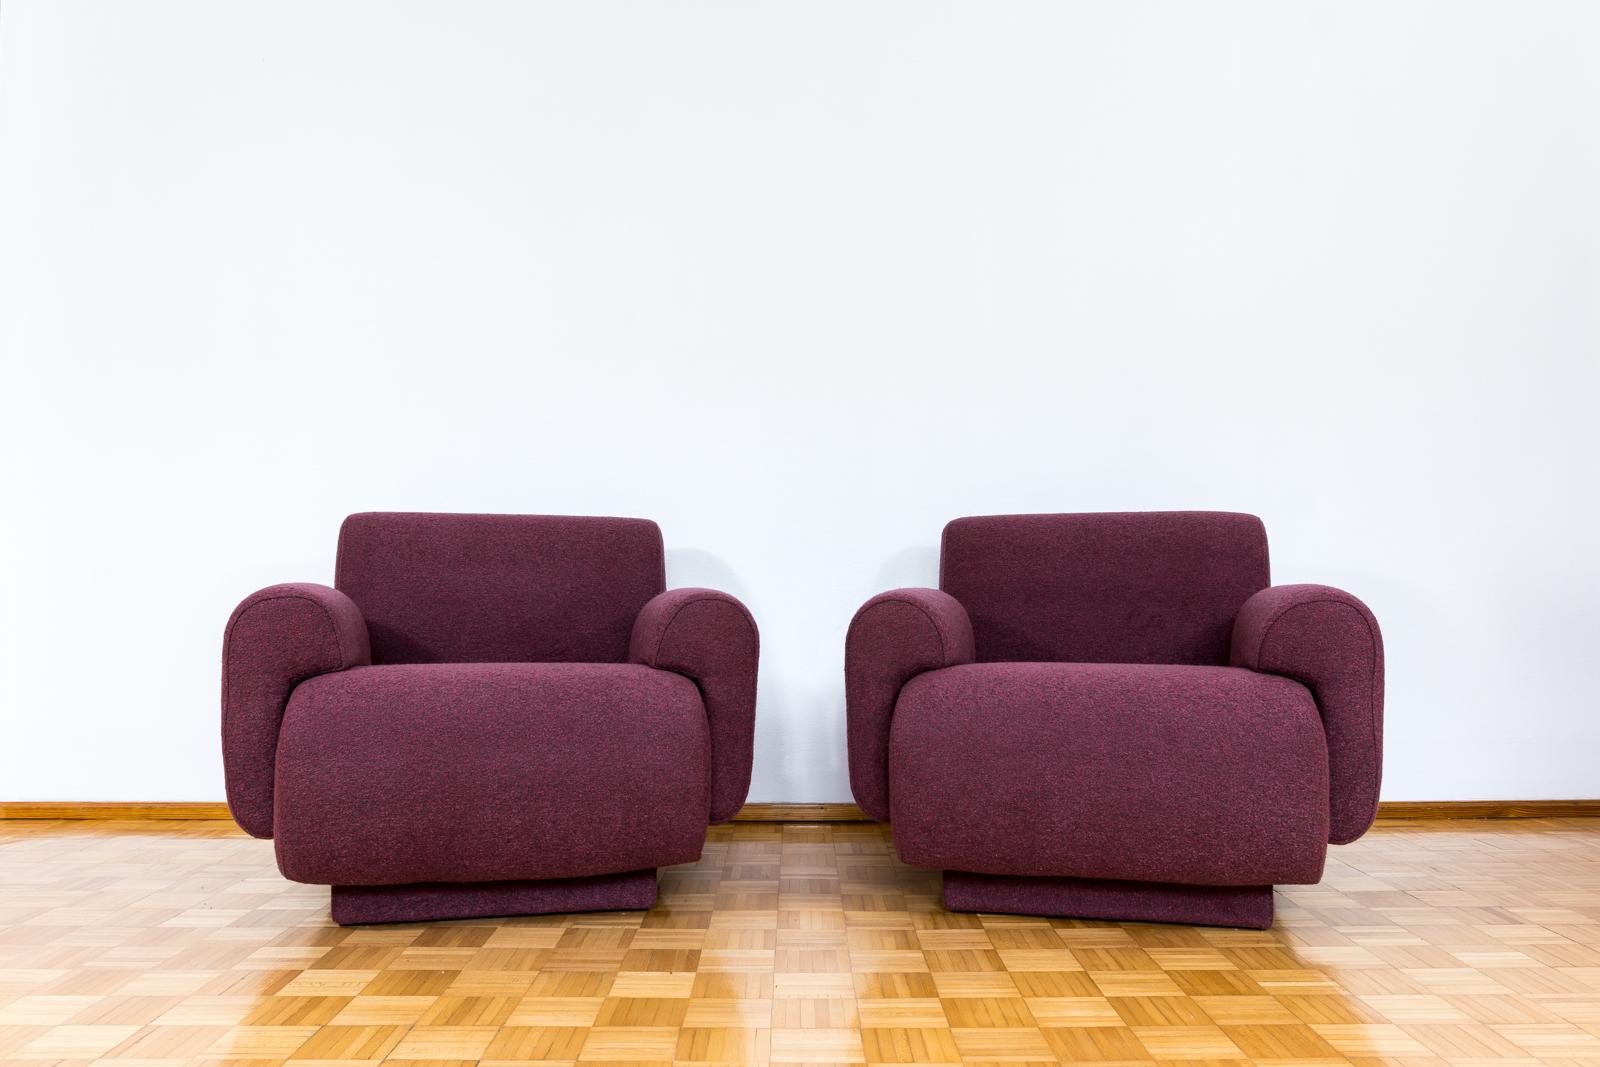 Space Age Pair Of Purple Modular Lounge Chairs, 1970, Germany For Sale